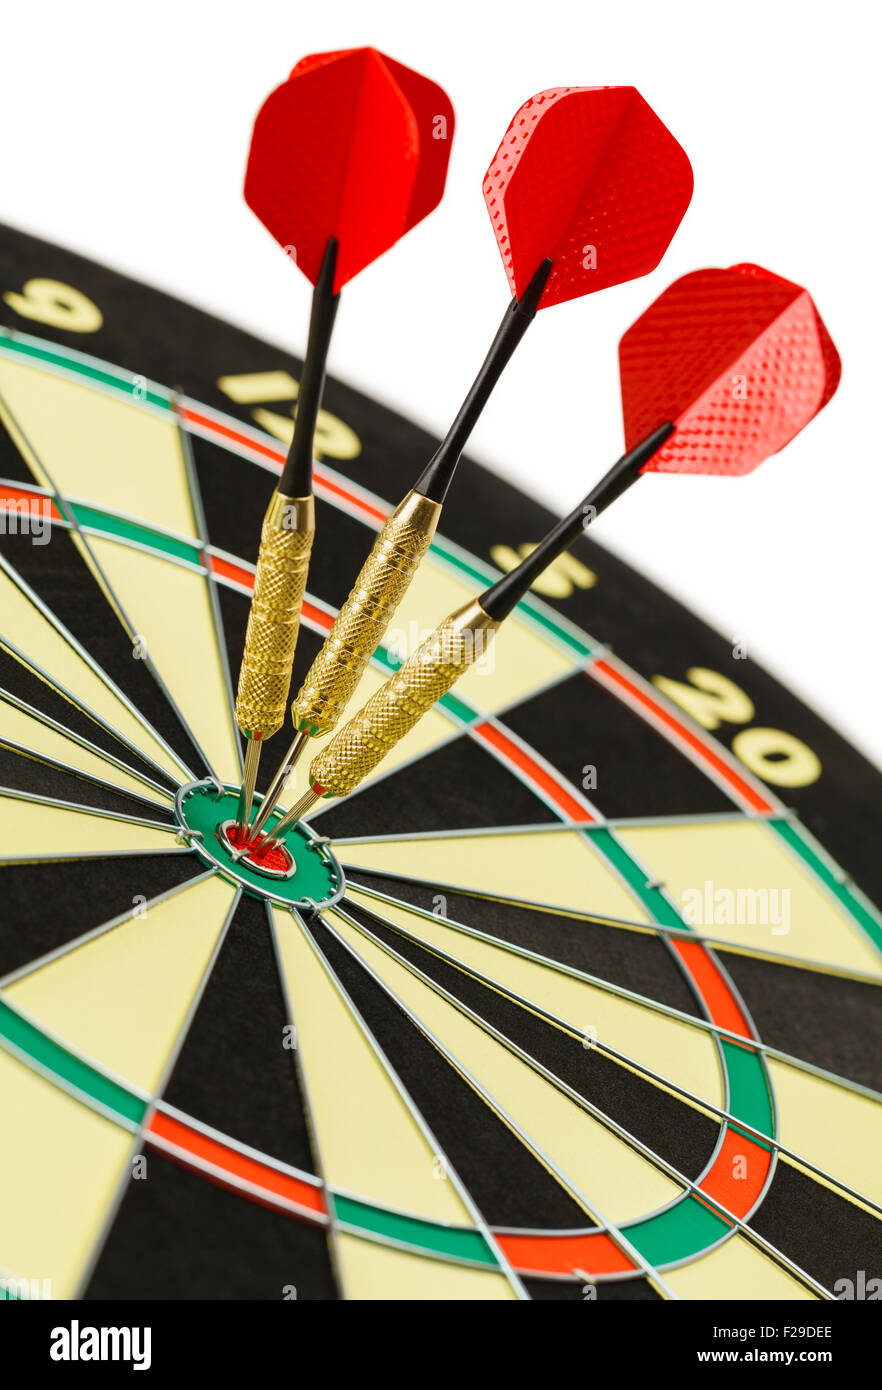 Three Darts in the Bulls Eye on Dart Board Isolated on White Background. Stock Photo